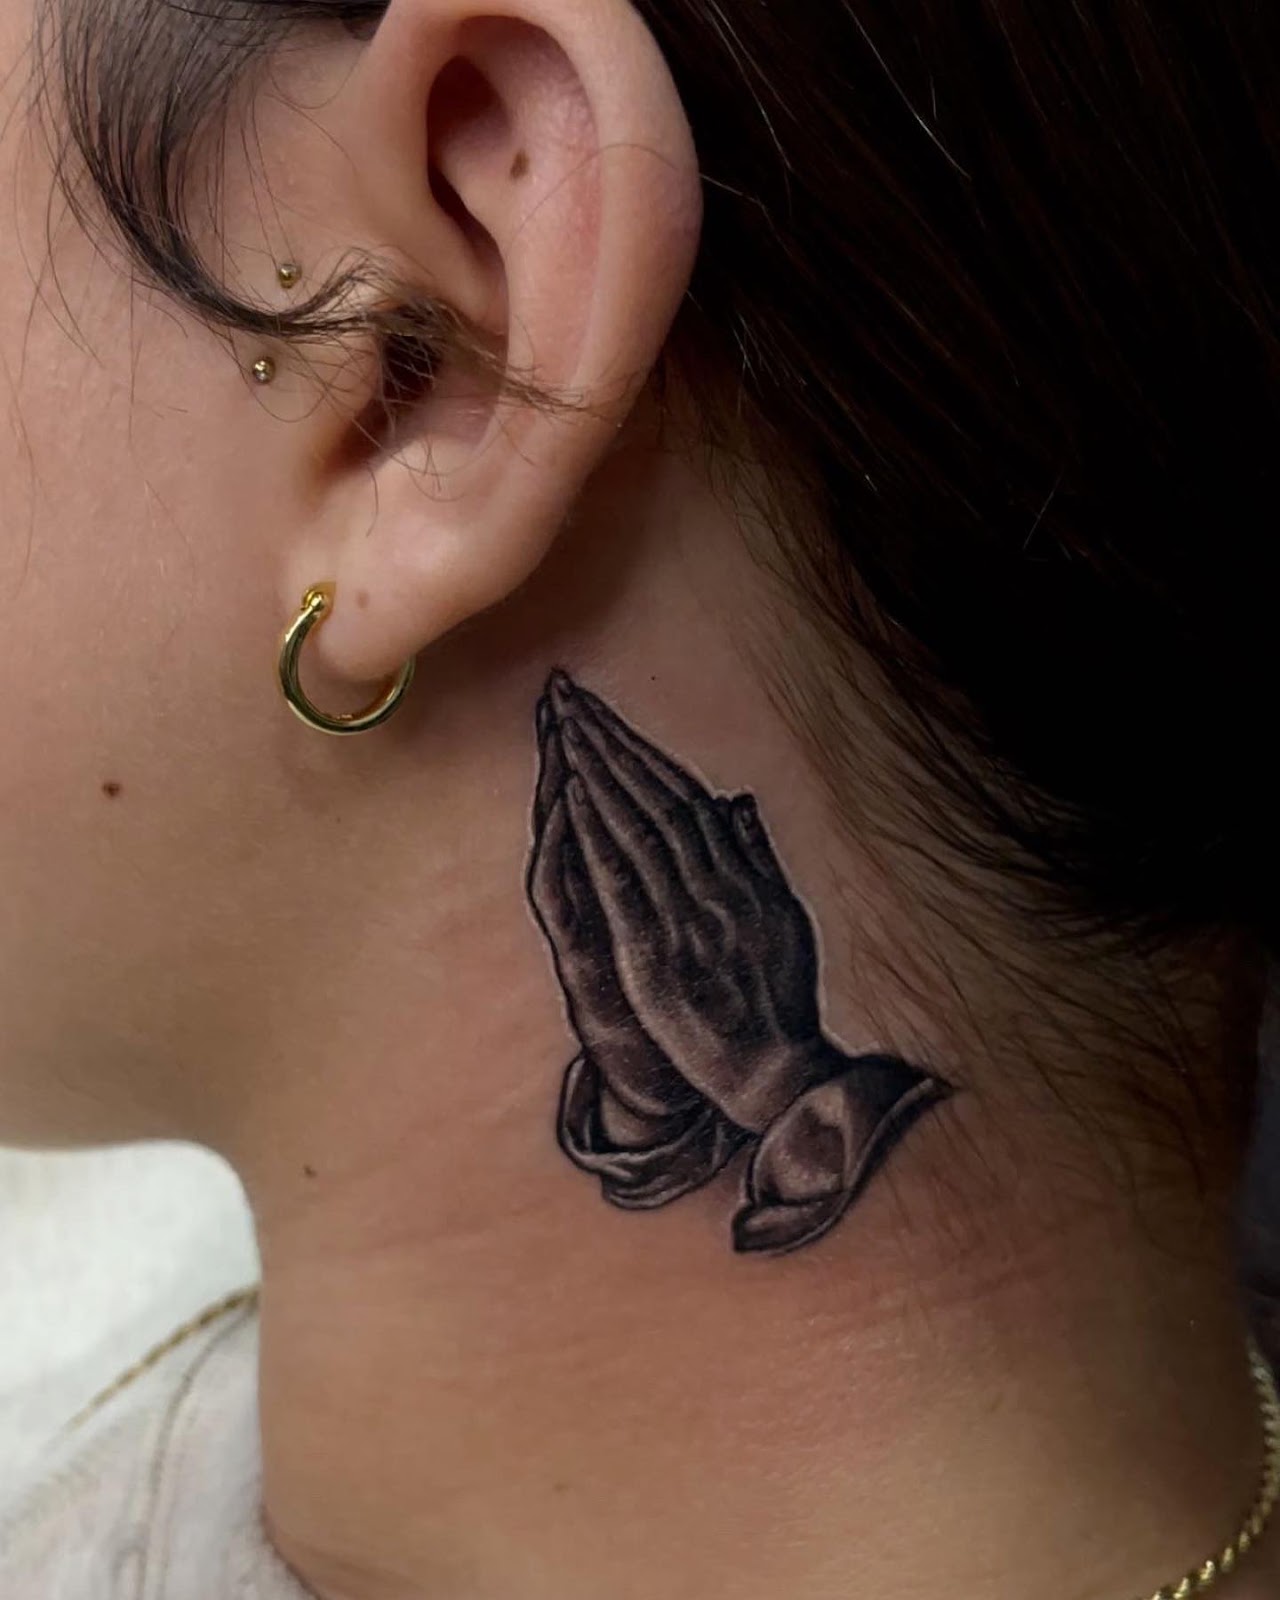 Praying Hands Behind The Ear Tattoo